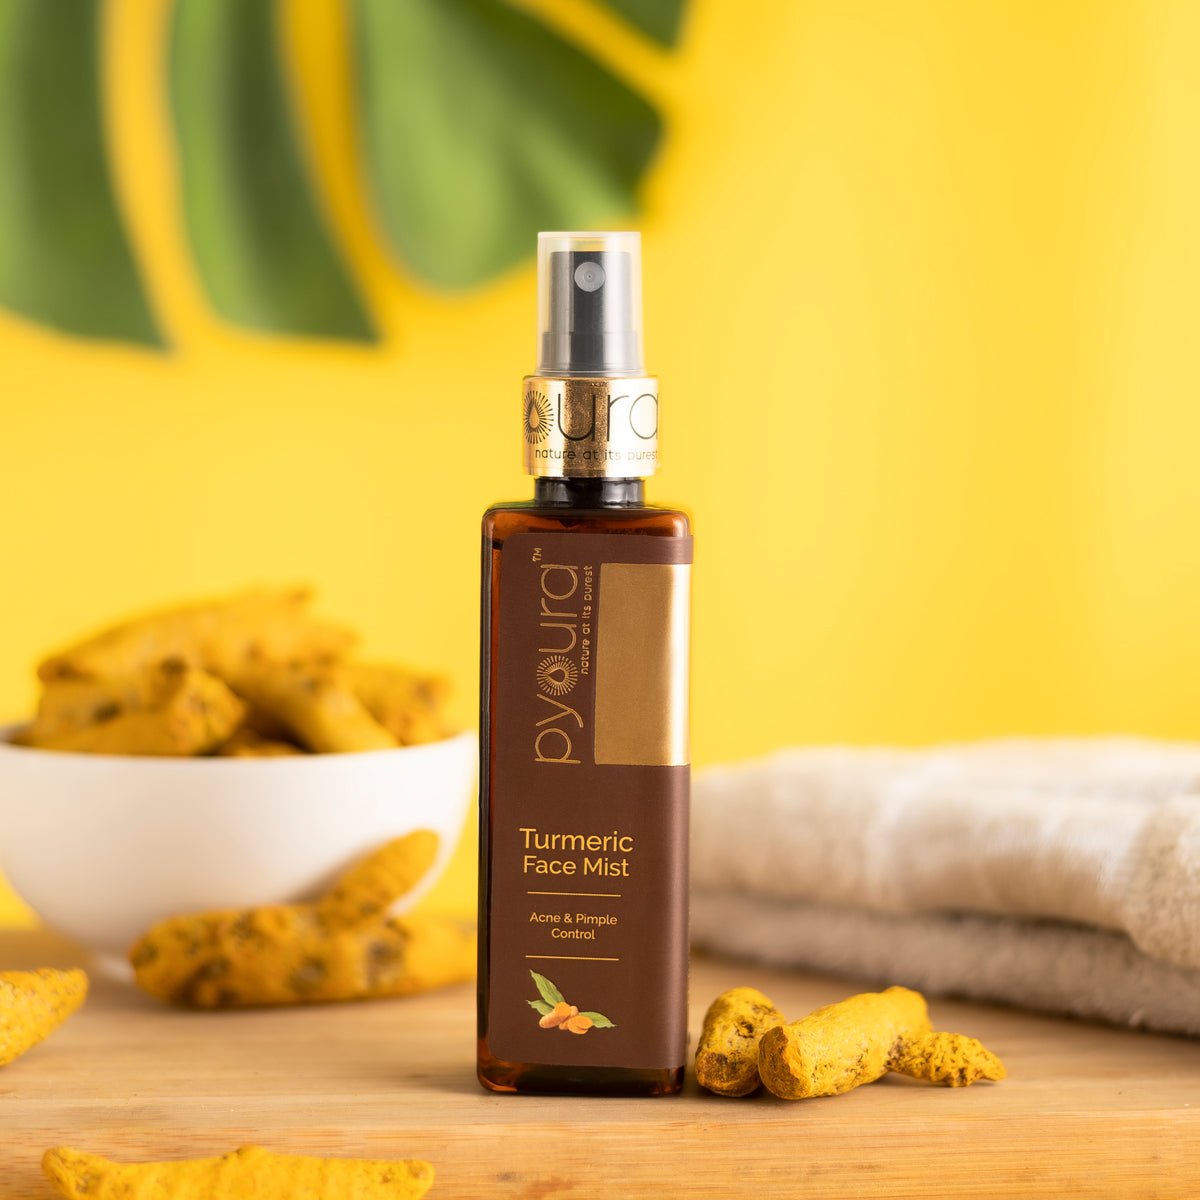 Turmeric +Neem + Rose Face Mist Combo <h4> A complete, easy-to-use skincare kit that keeps managing acne, pimples and dark spots just a soothing, alcohol and stain free spray away <h4> <h6>100 ml each Pack of 3<h6>